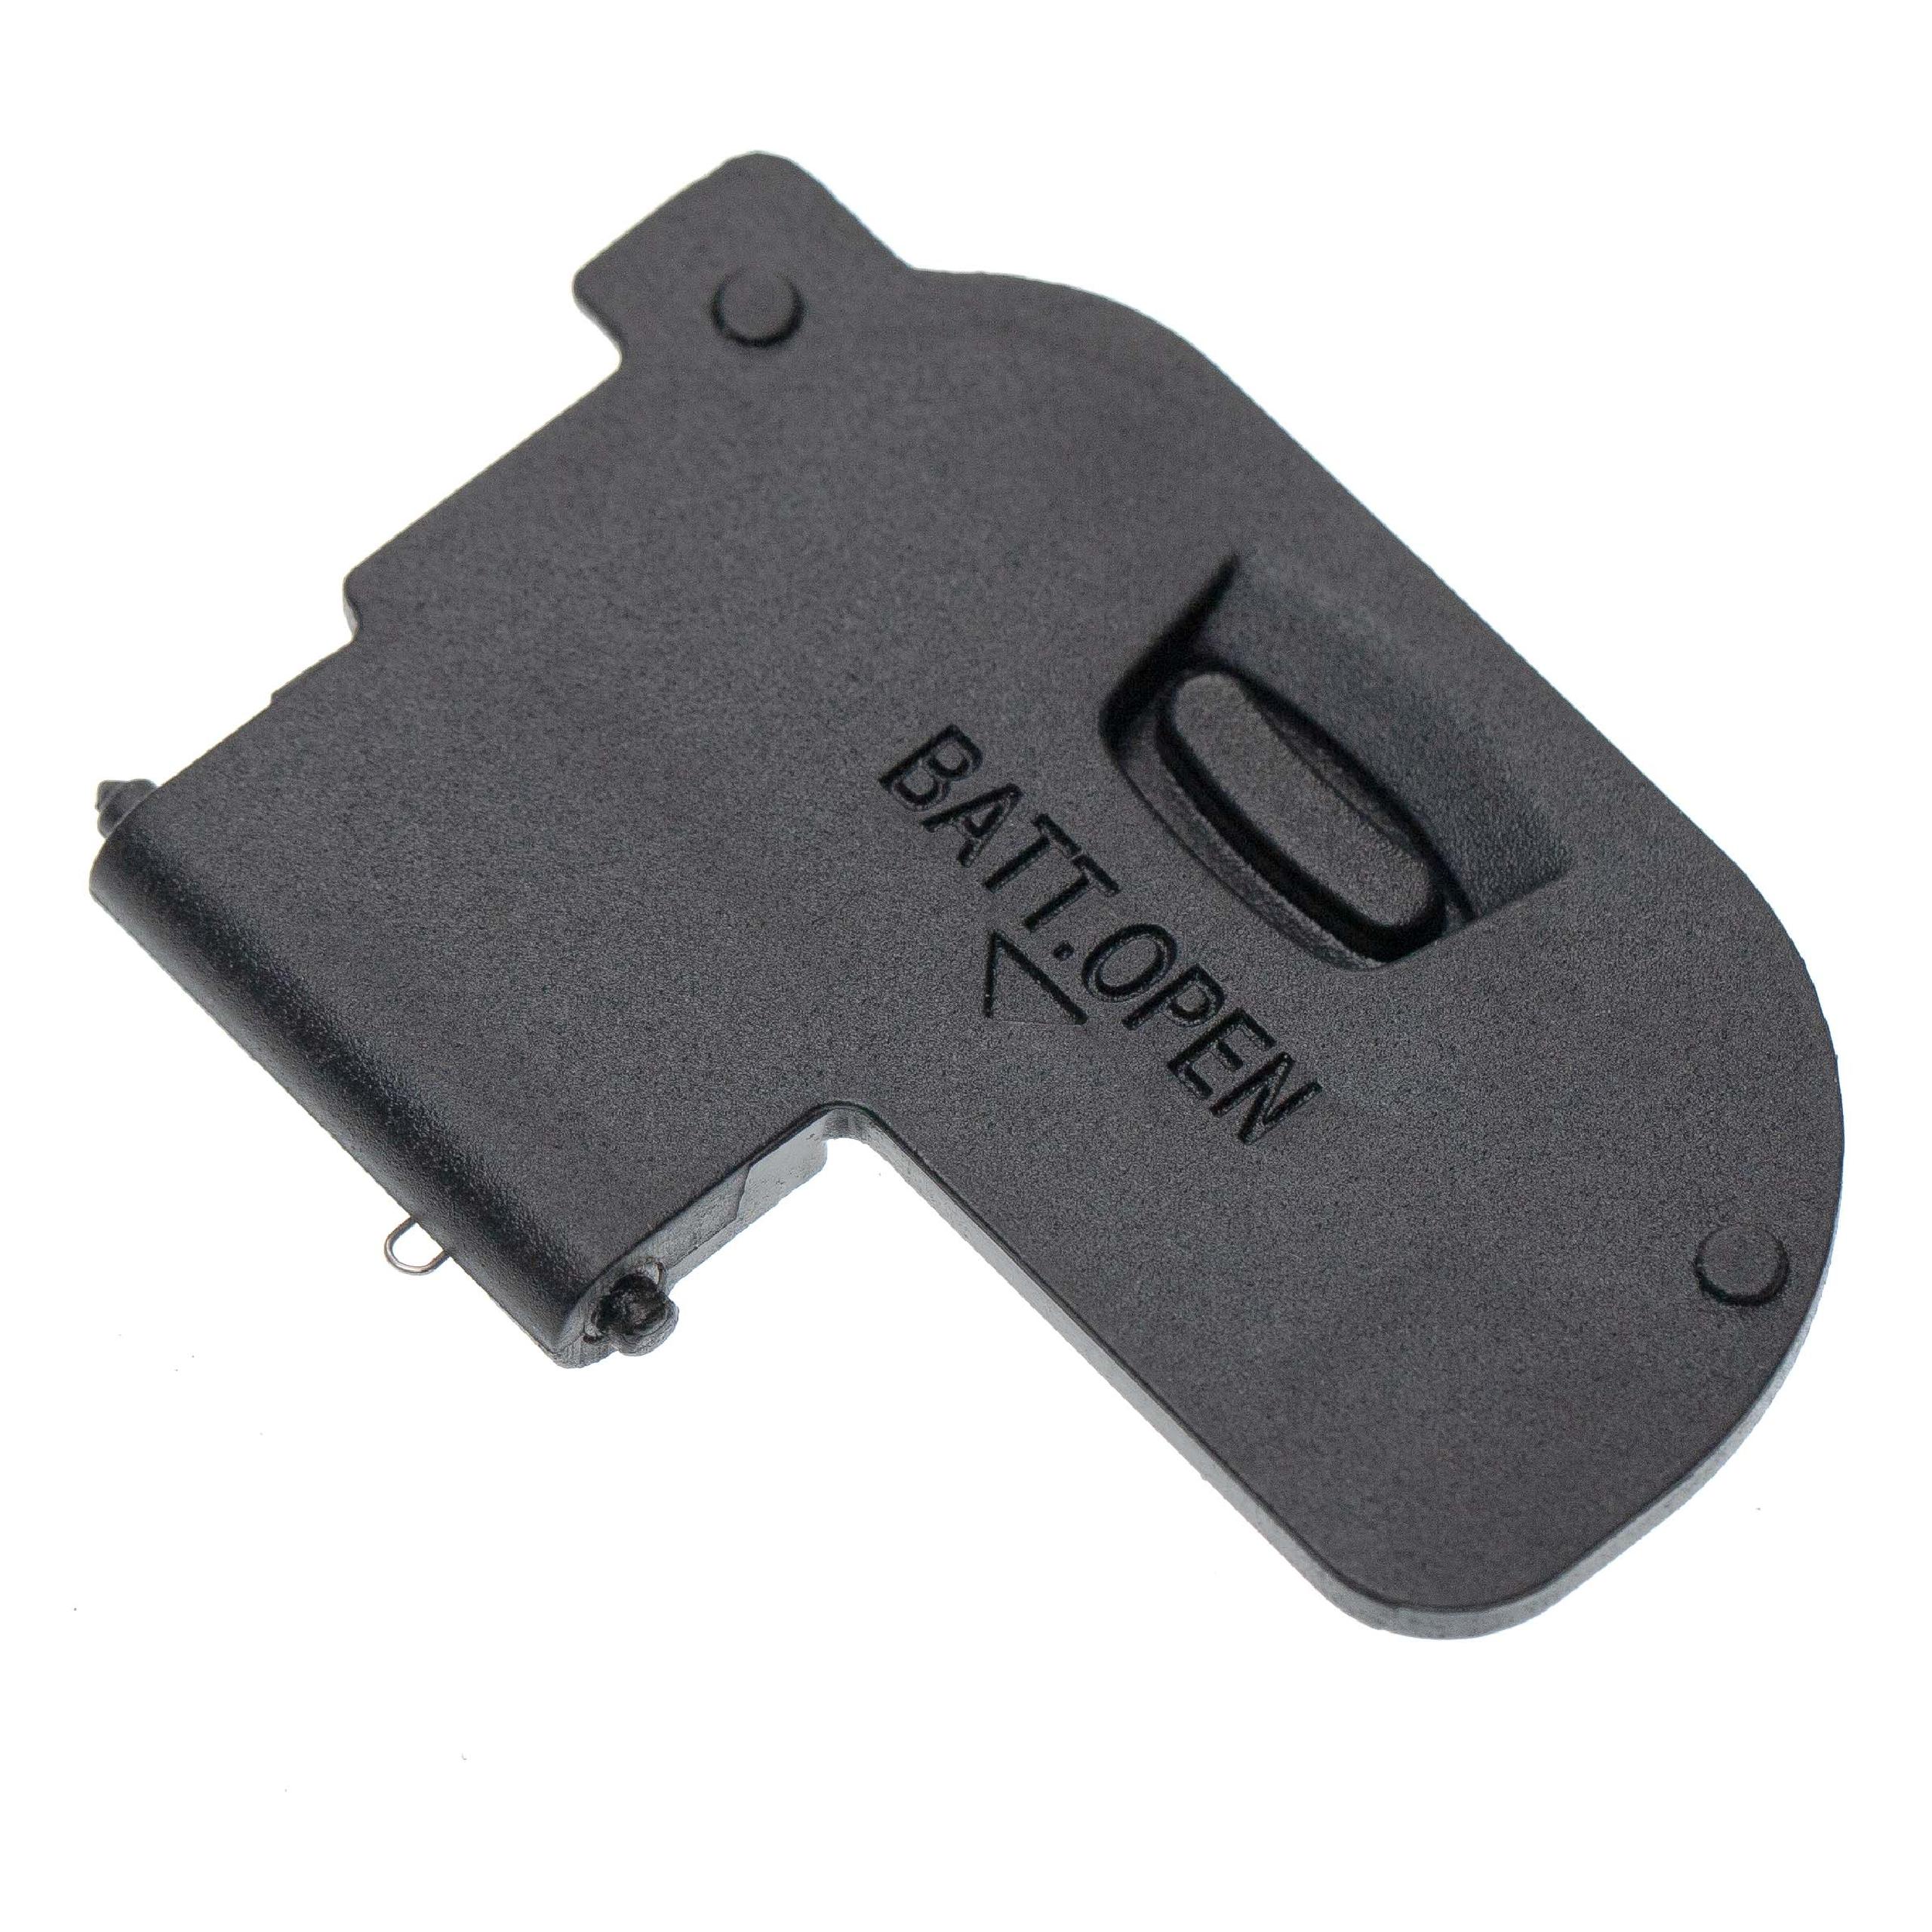 Battery Door Cover suitable for Canon EOS 5D Mark IV Camera, Battery Grip